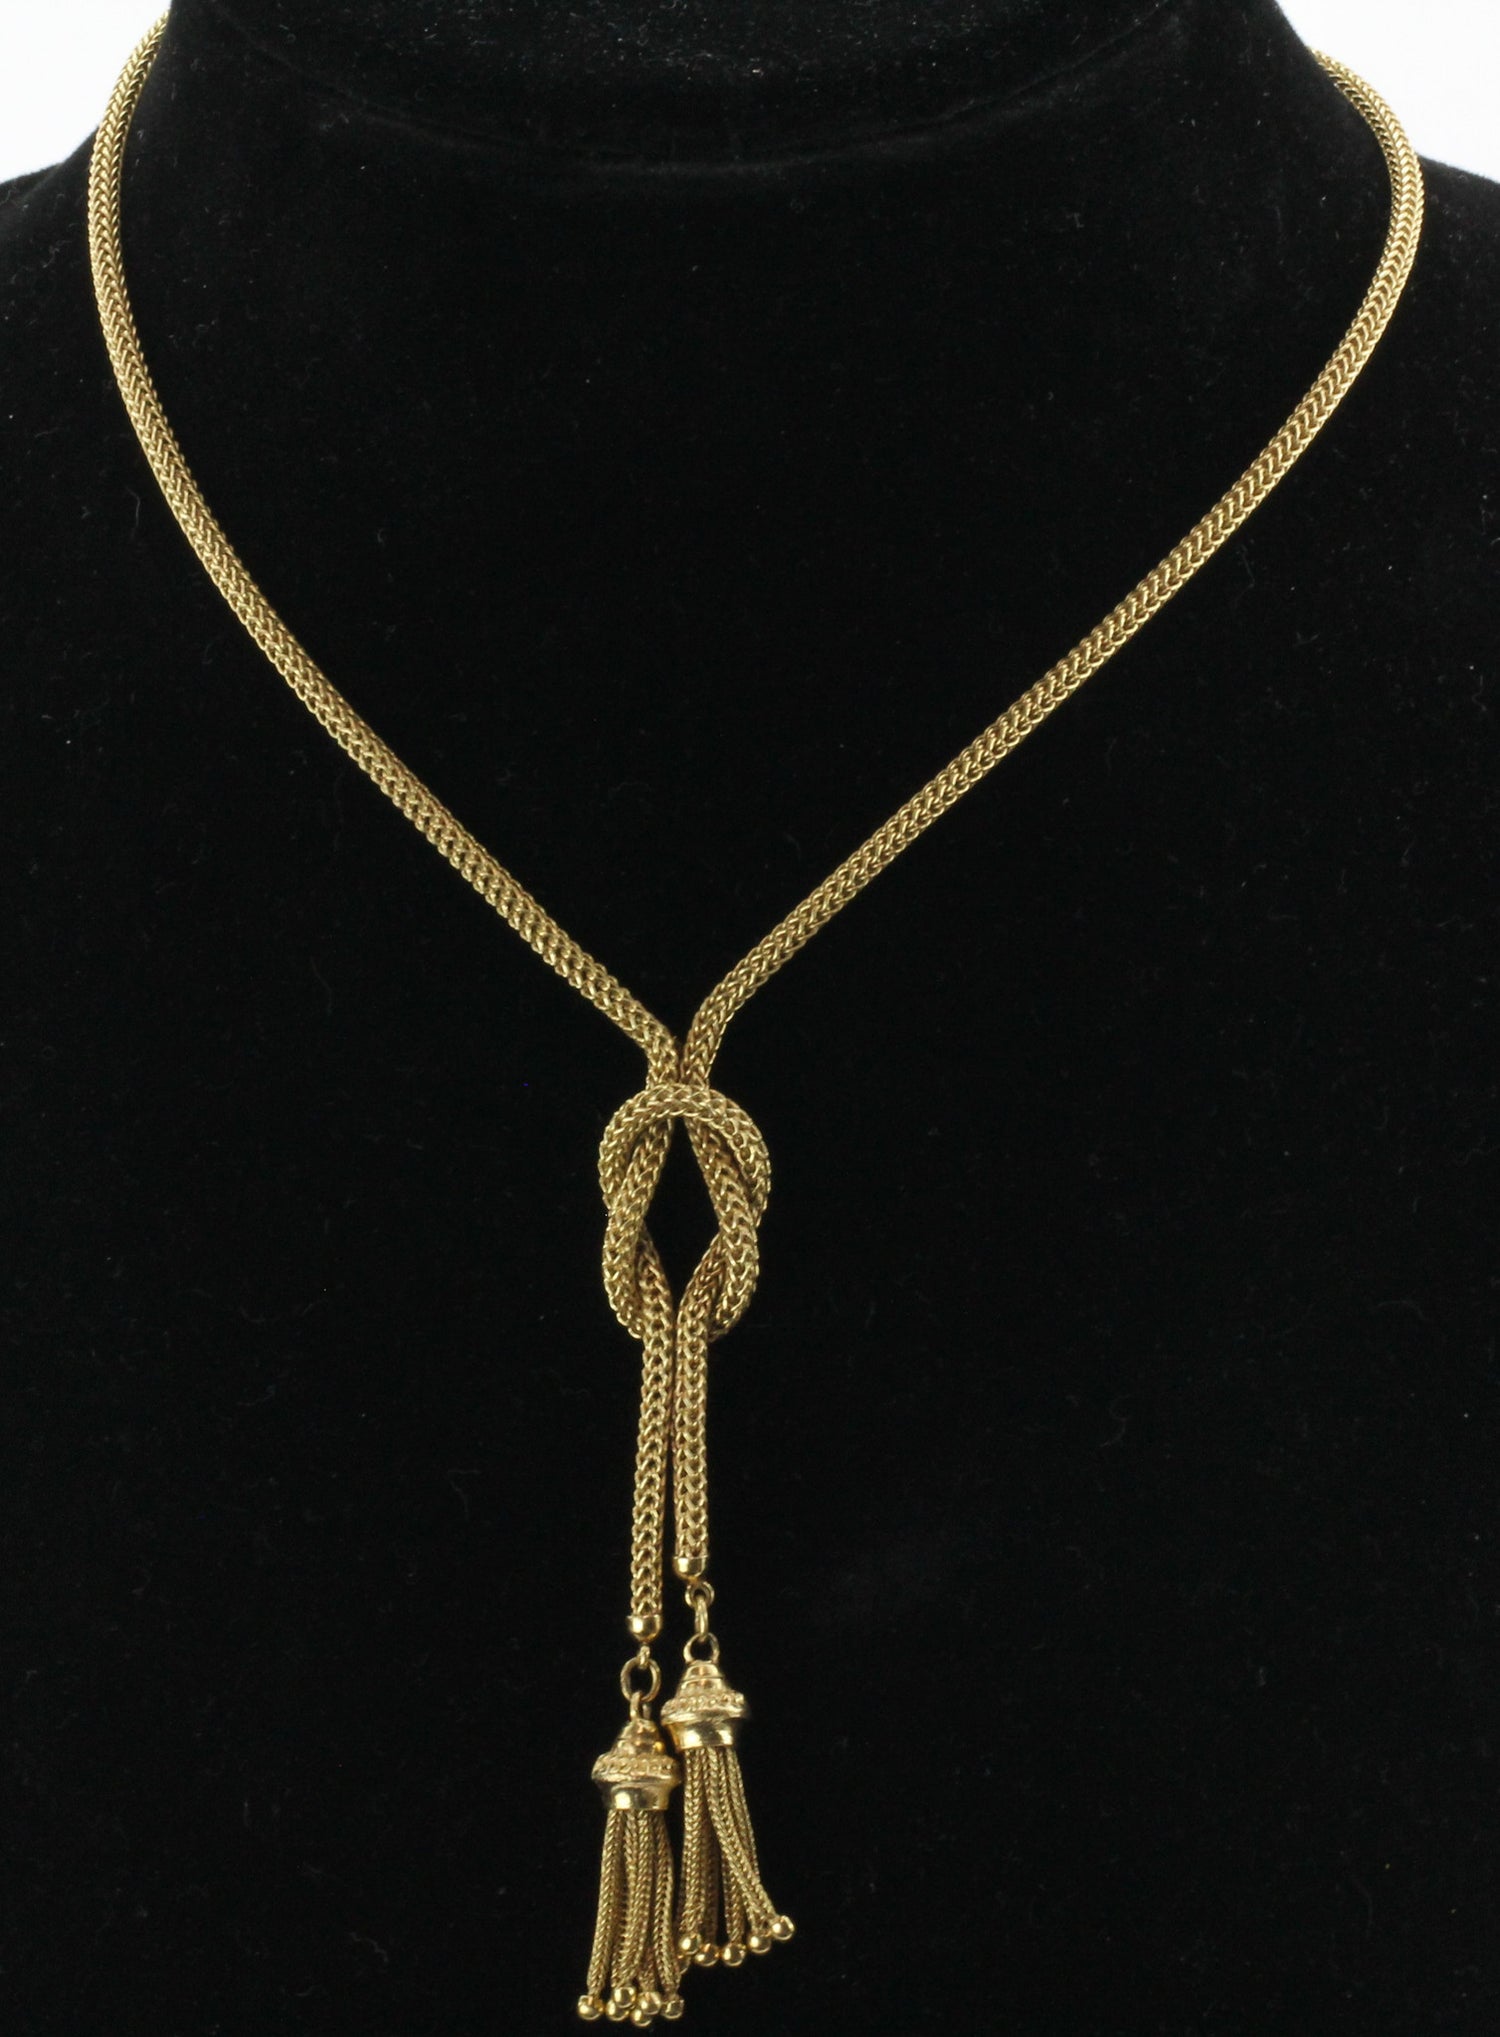 Vintage Victorian Revival Knotted Tassel 14K Gold Rope Necklace – QUEEN MAY